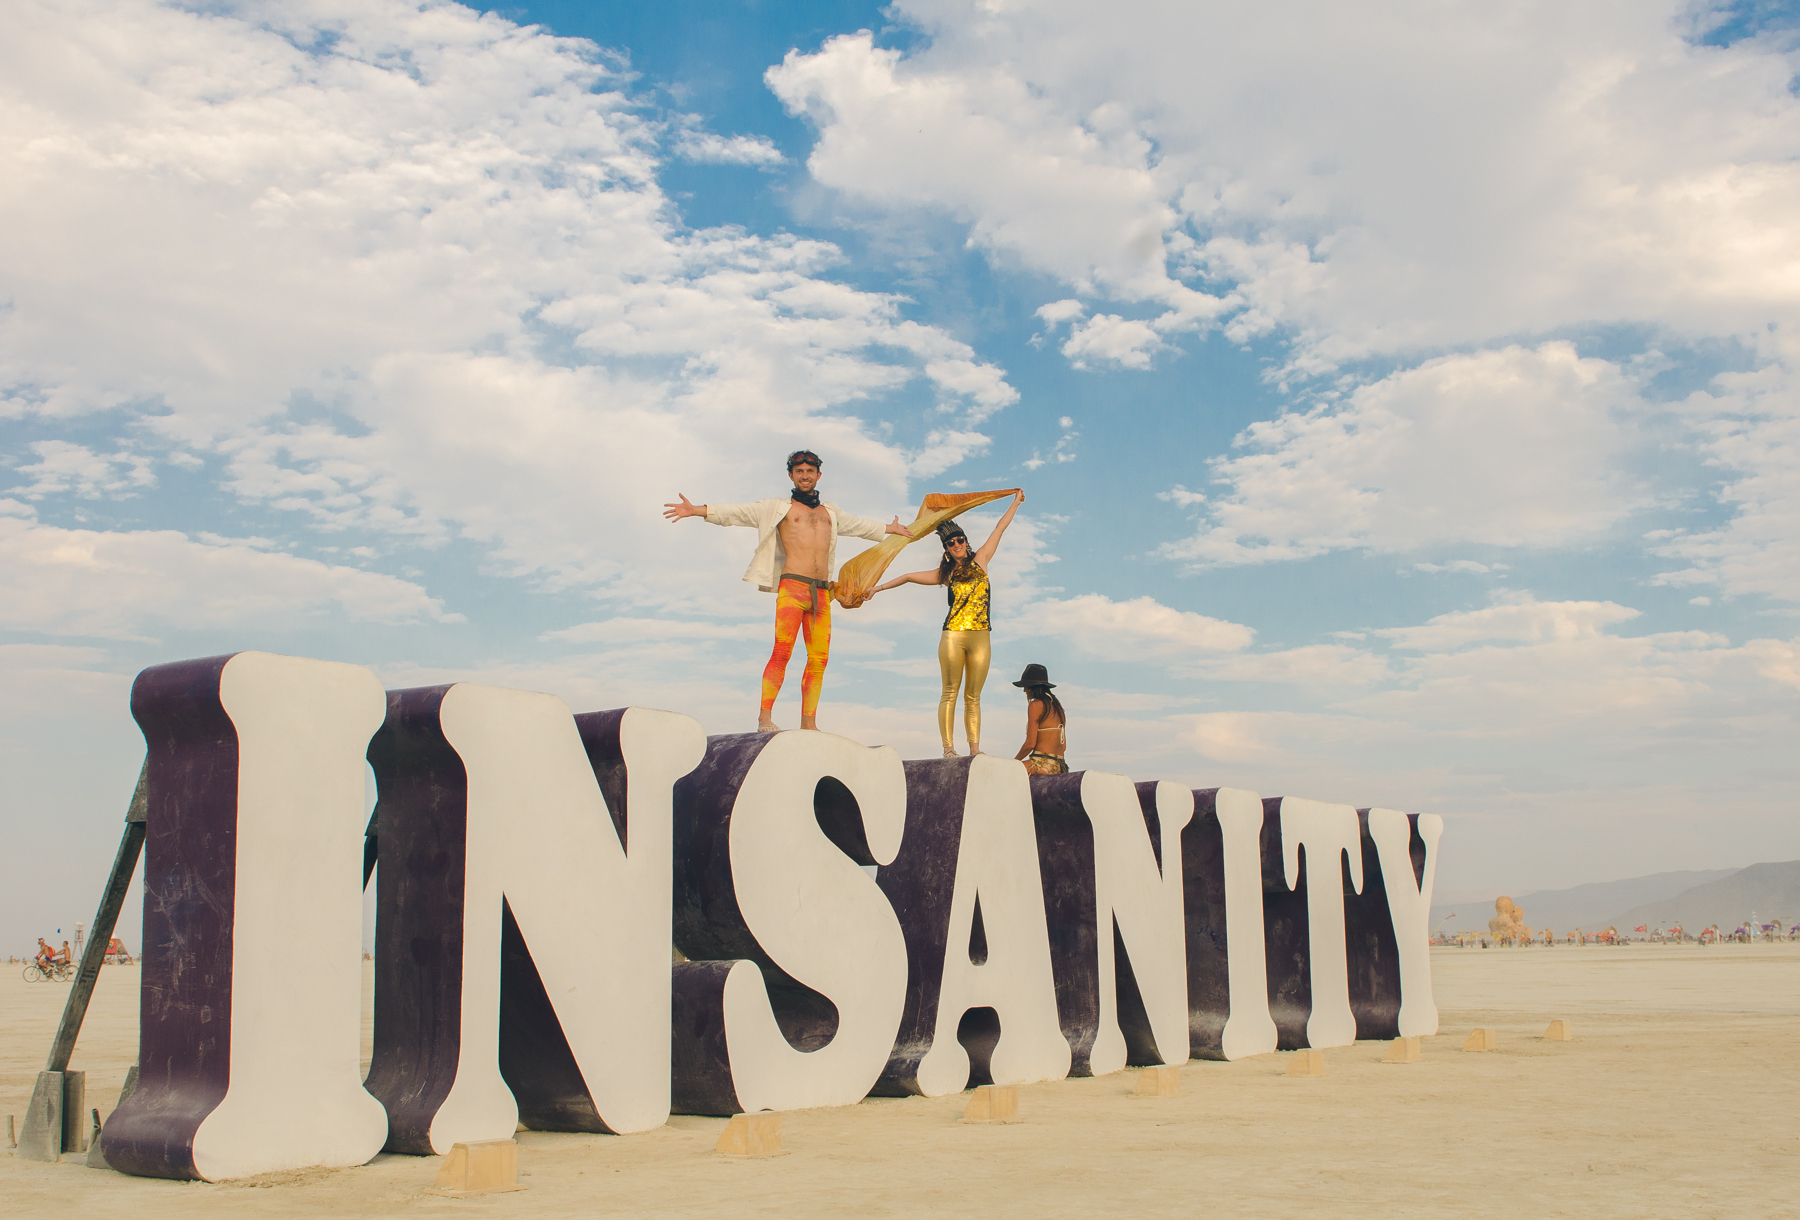 Me in gold tights, feeling blissfully happy to be on top of Insanity, on the Playa, at Black Rock City.